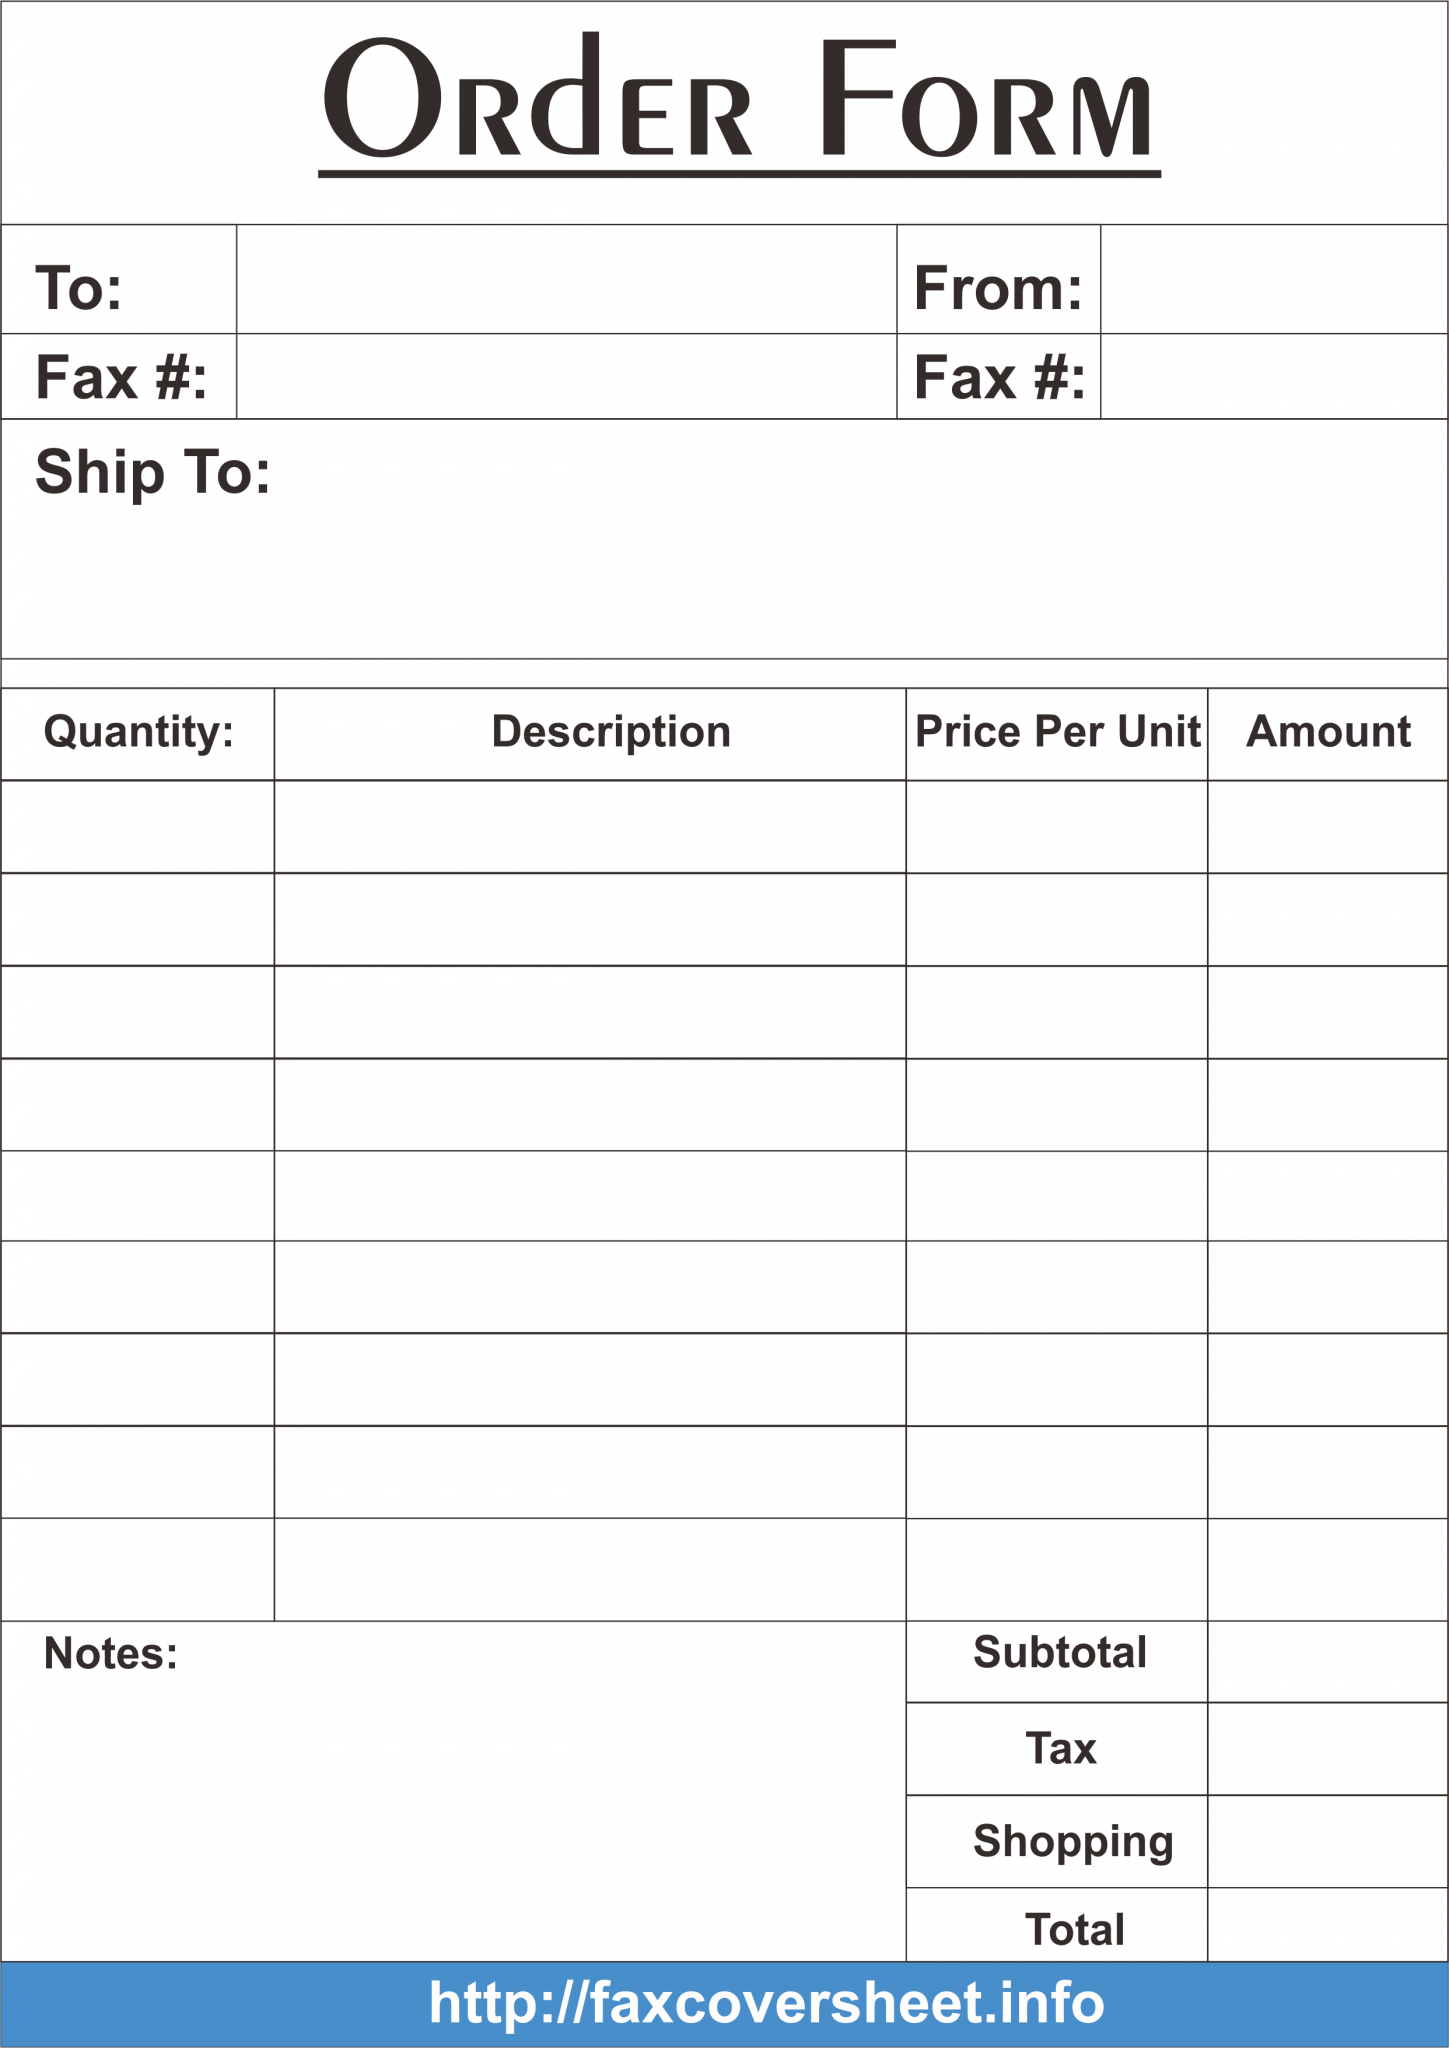 order form free fax cover sheet template